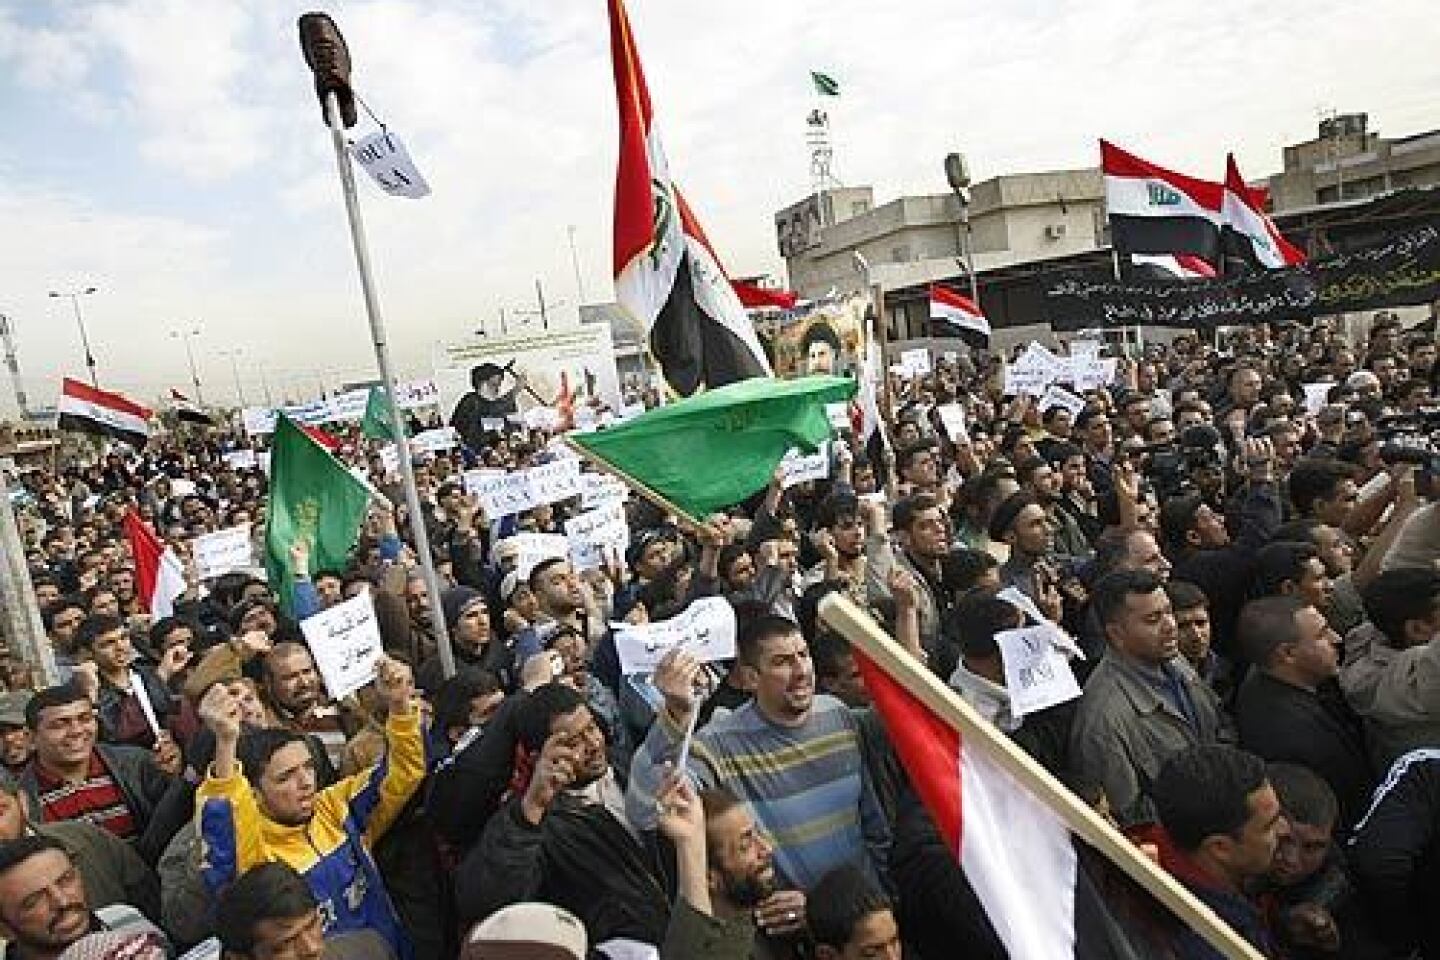 Iraqis in Baghdad's Sadr City district protest the recent visit by President Bush and the arrest of Iraqi journalist Muntather Zaidi, who caused a furor when he hurled shoes at Bush during a news conference with Iraqi Prime Minister Nouri Maliki.